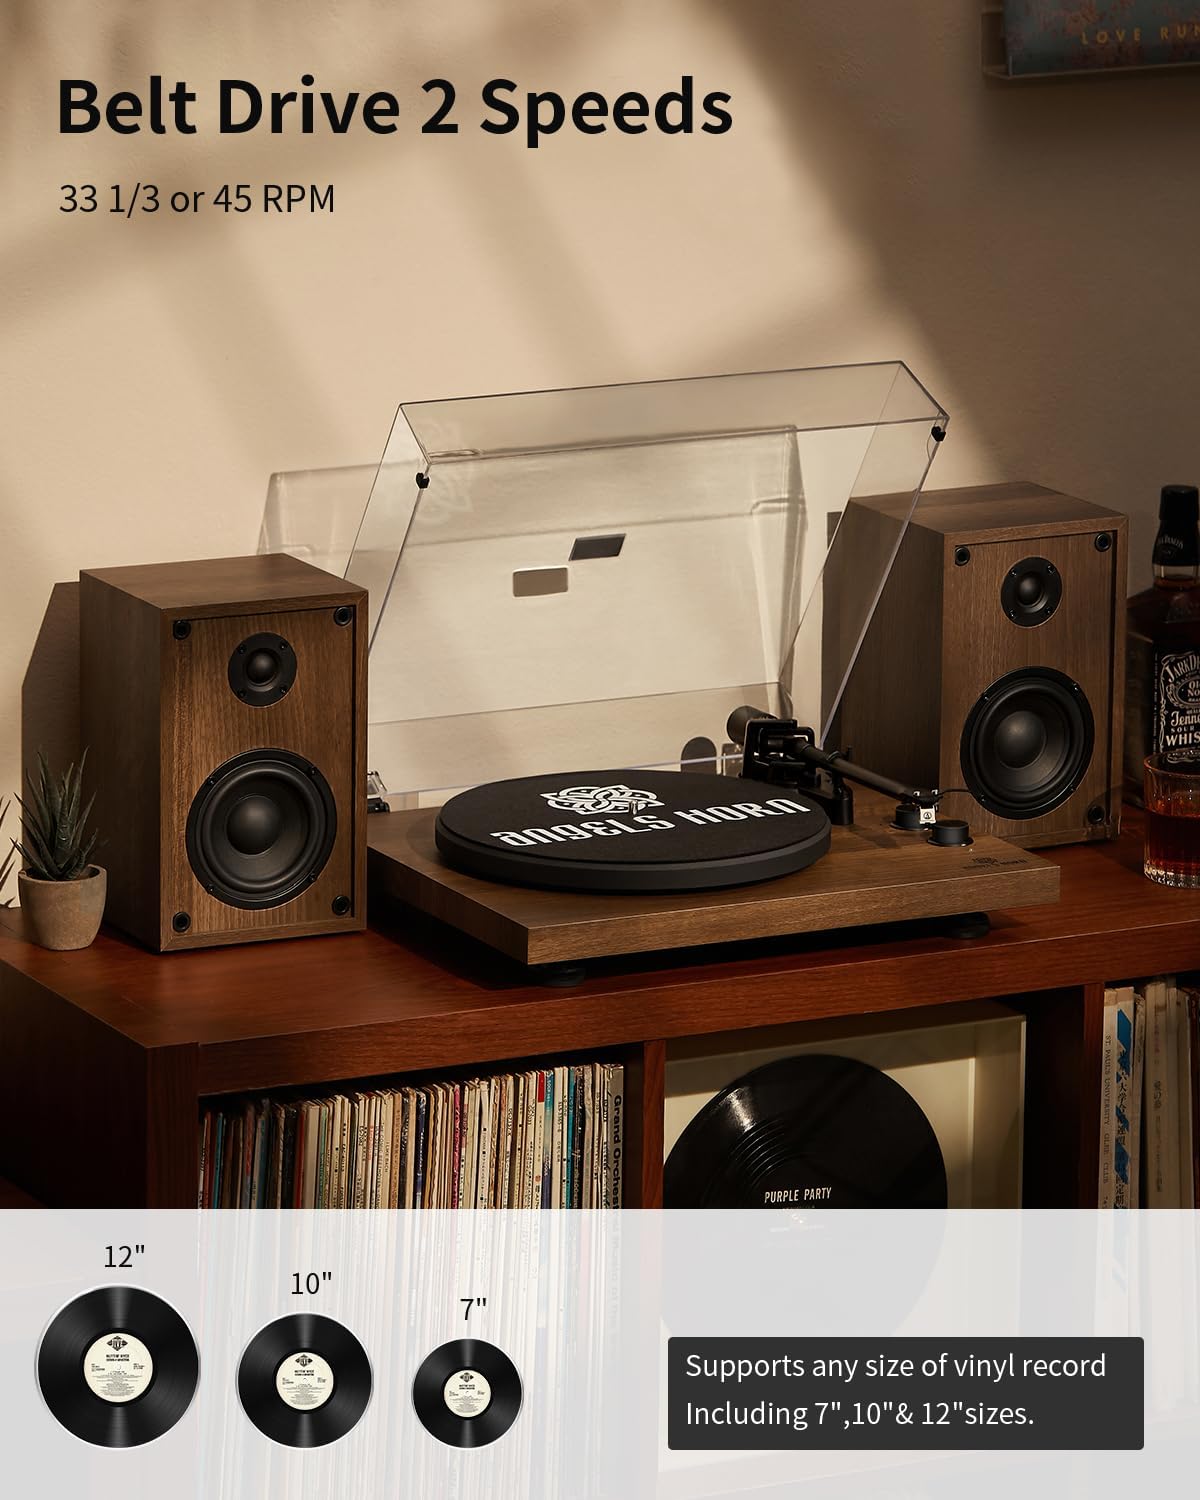 Vinyl Record Player, Hi-Fi System Bluetooth Turntable Players with Stereo Bookshelf Speakers, Built-in Phono Preamp, Belt Drive 2-Speed, Adjustable Counterweight, AT-3600L